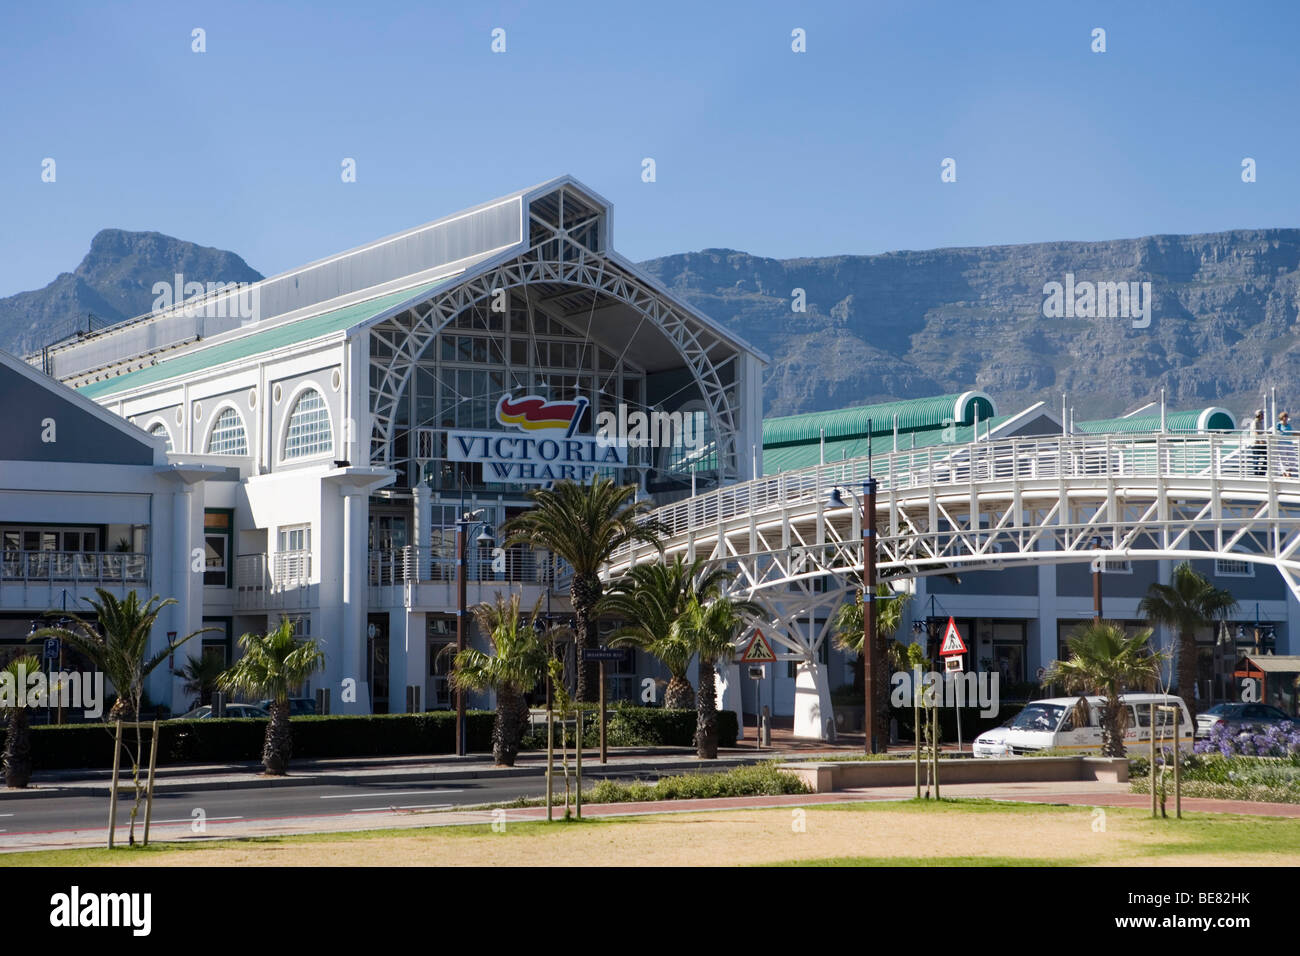 Victoria Wharf Shopping Complex along the waterfront., Cape Town, Western Cape, South Africa, Africa Stock Photo